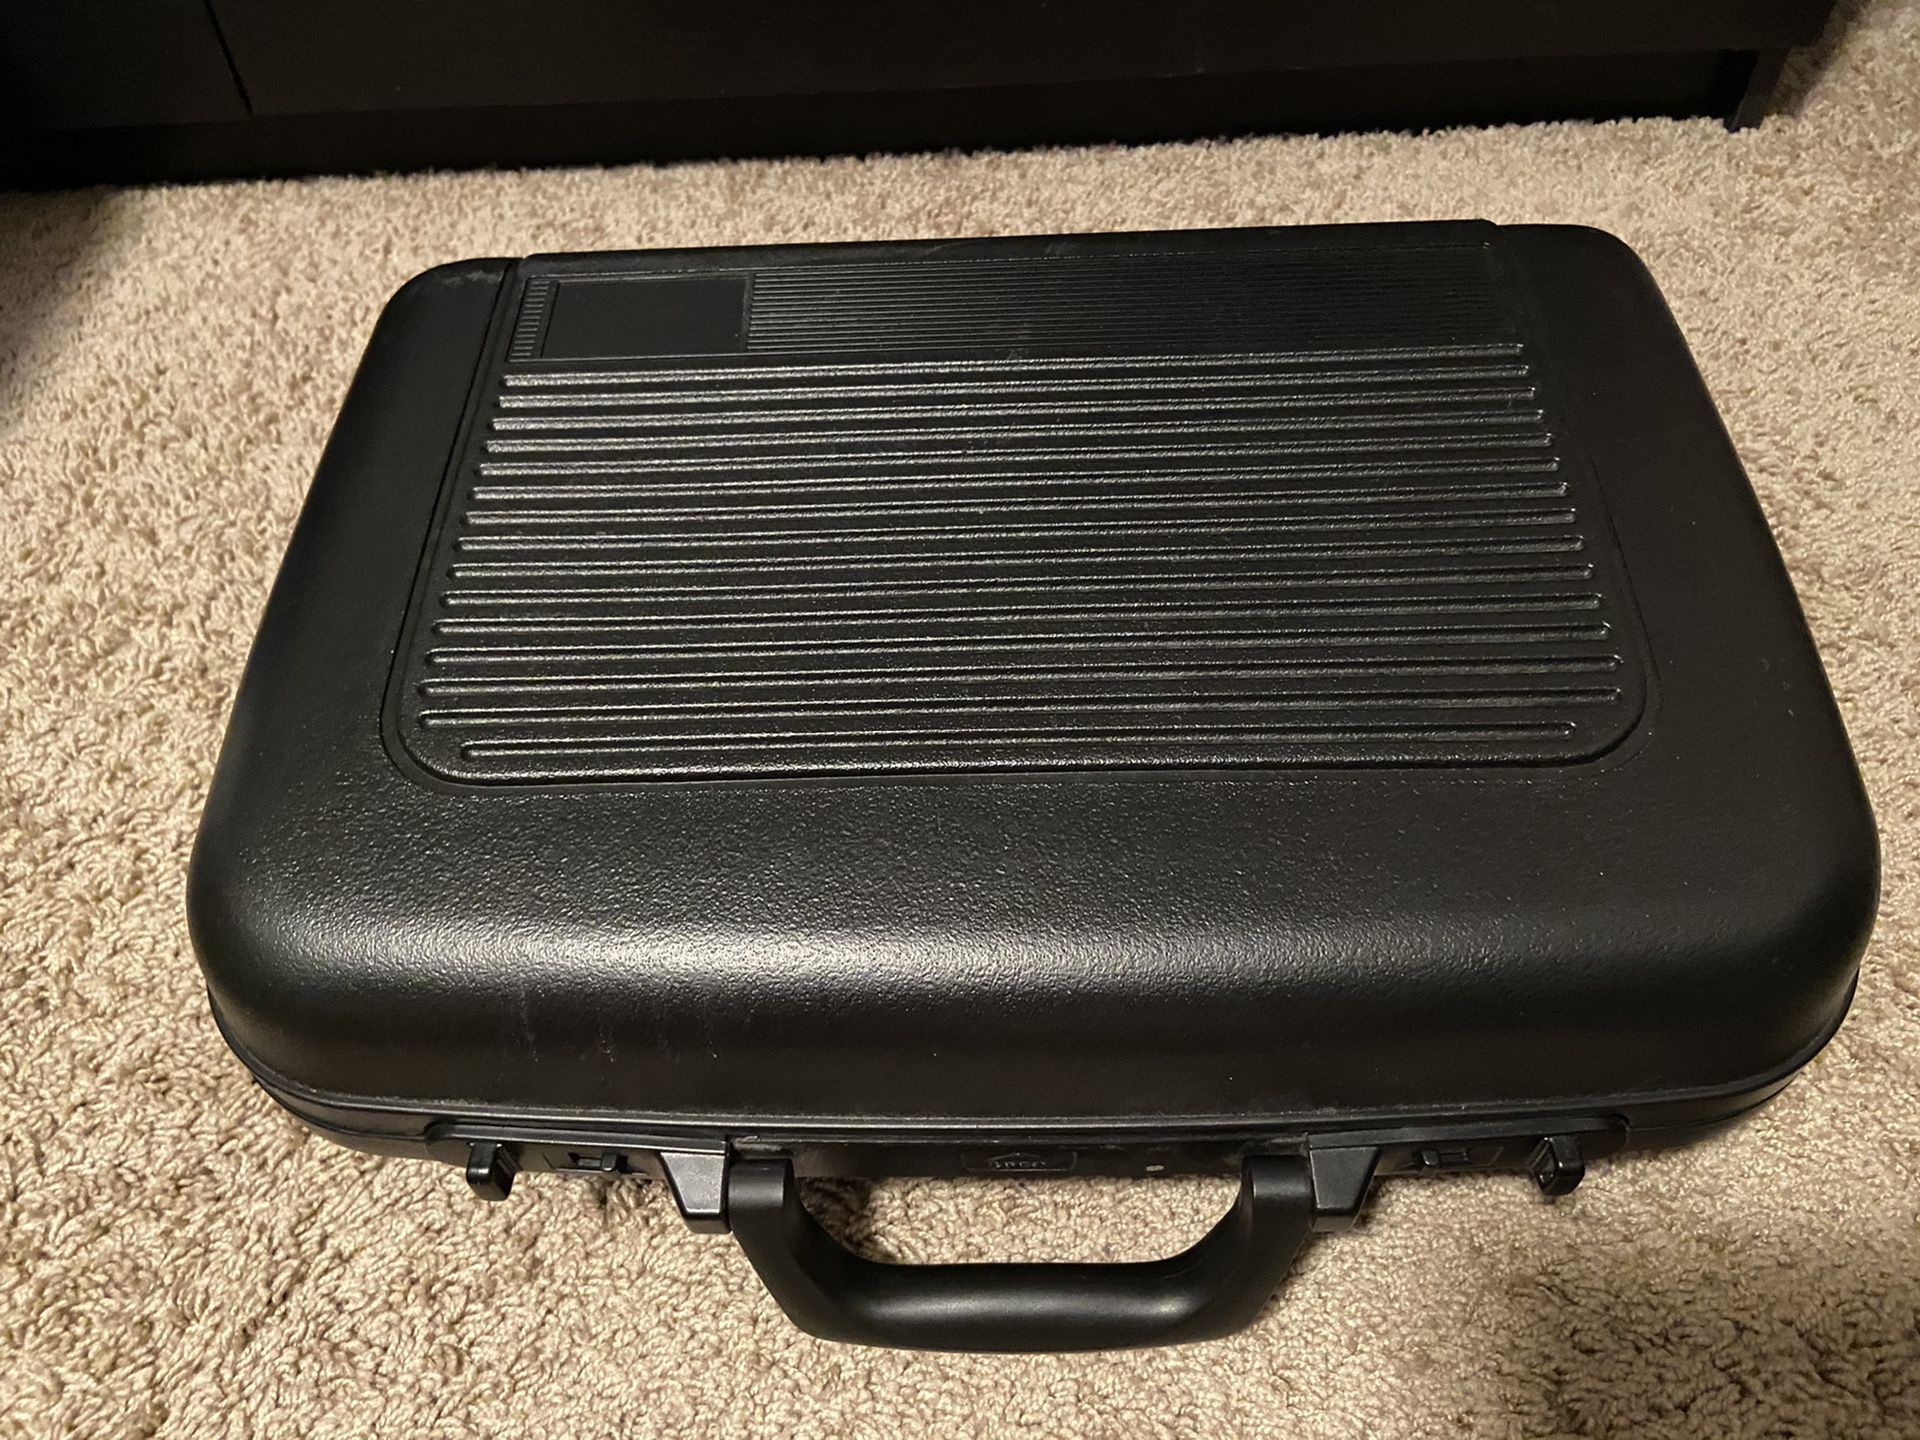 VHS Portable Camcorder with case